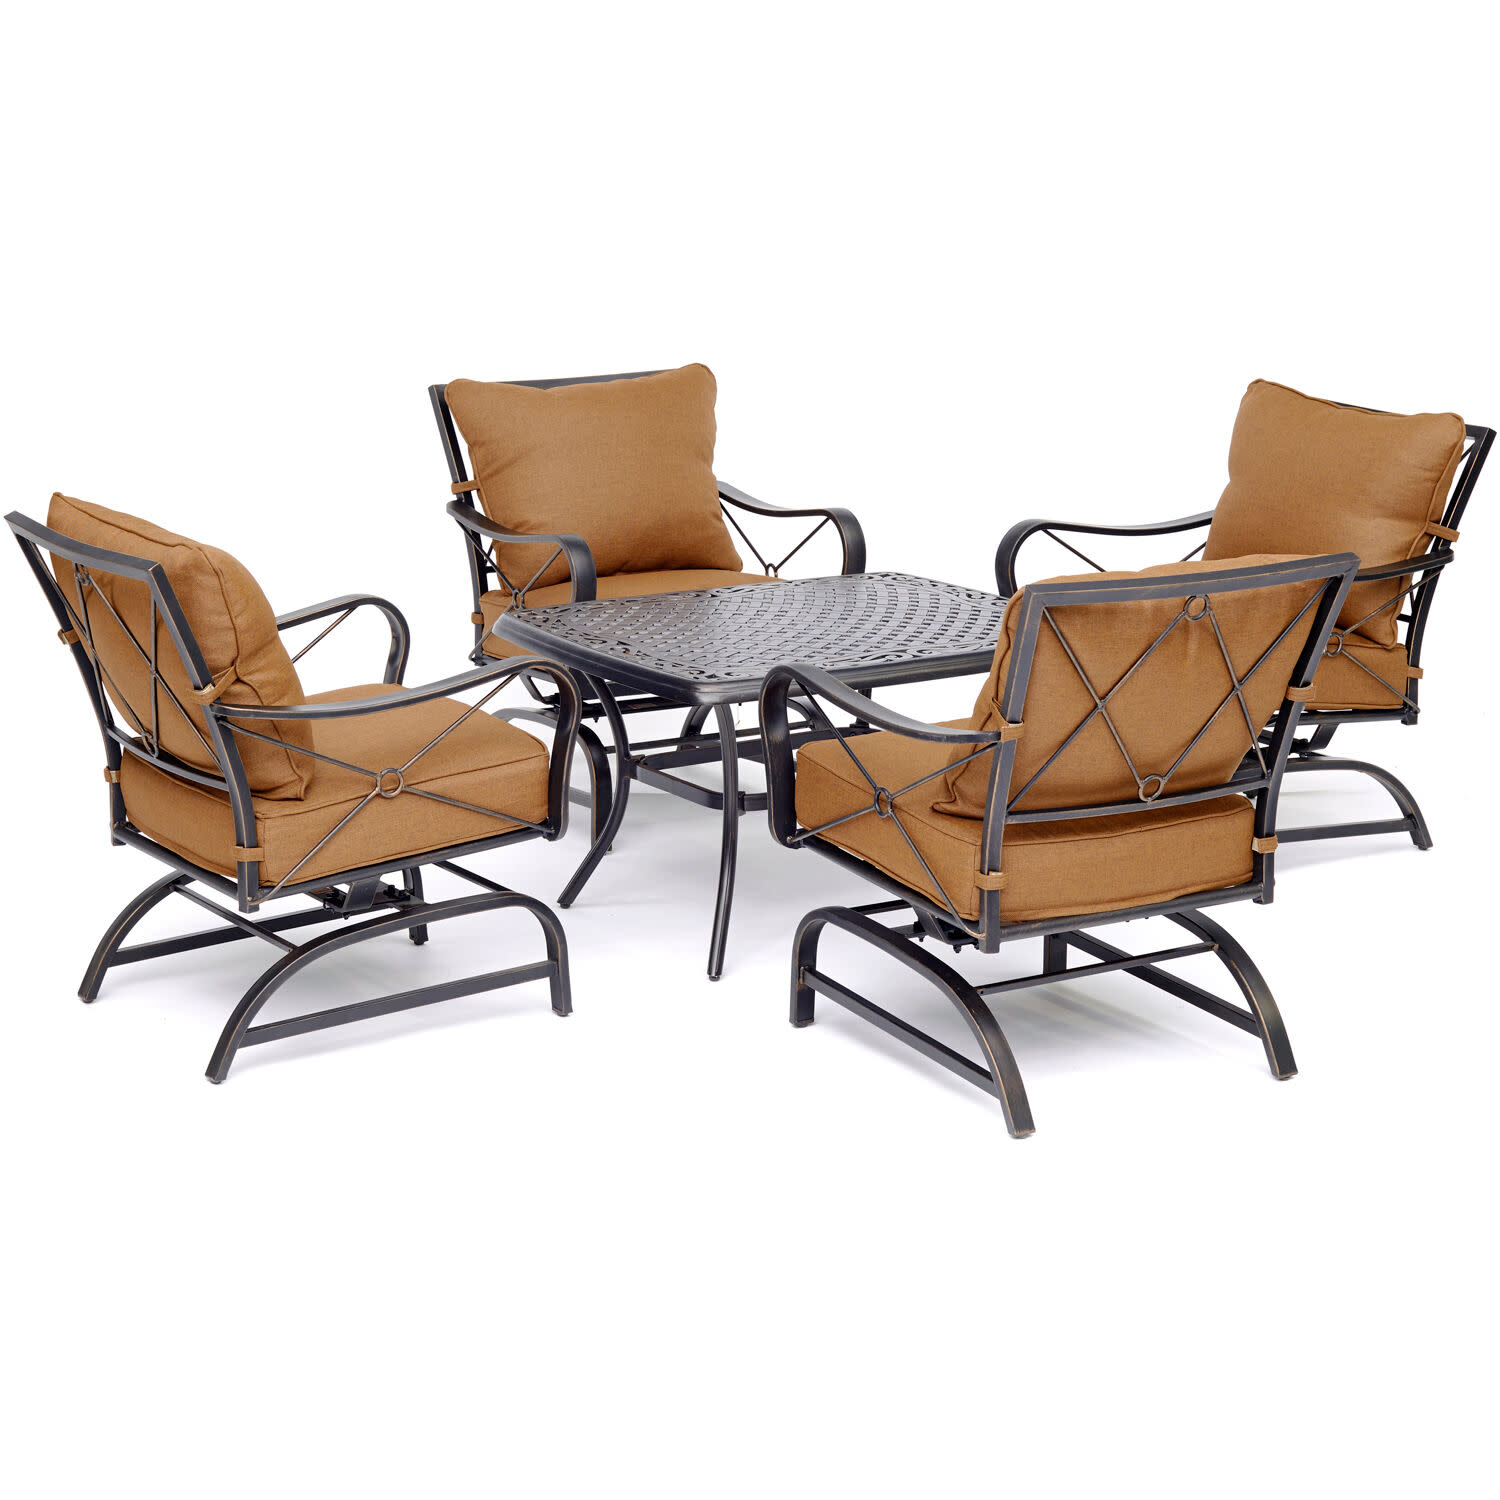 Hanover Summer Nights 5-Piece Conversation Set with 4 Cross-Back Rockers and a Cast-Top Coffee Table - image 3 of 3